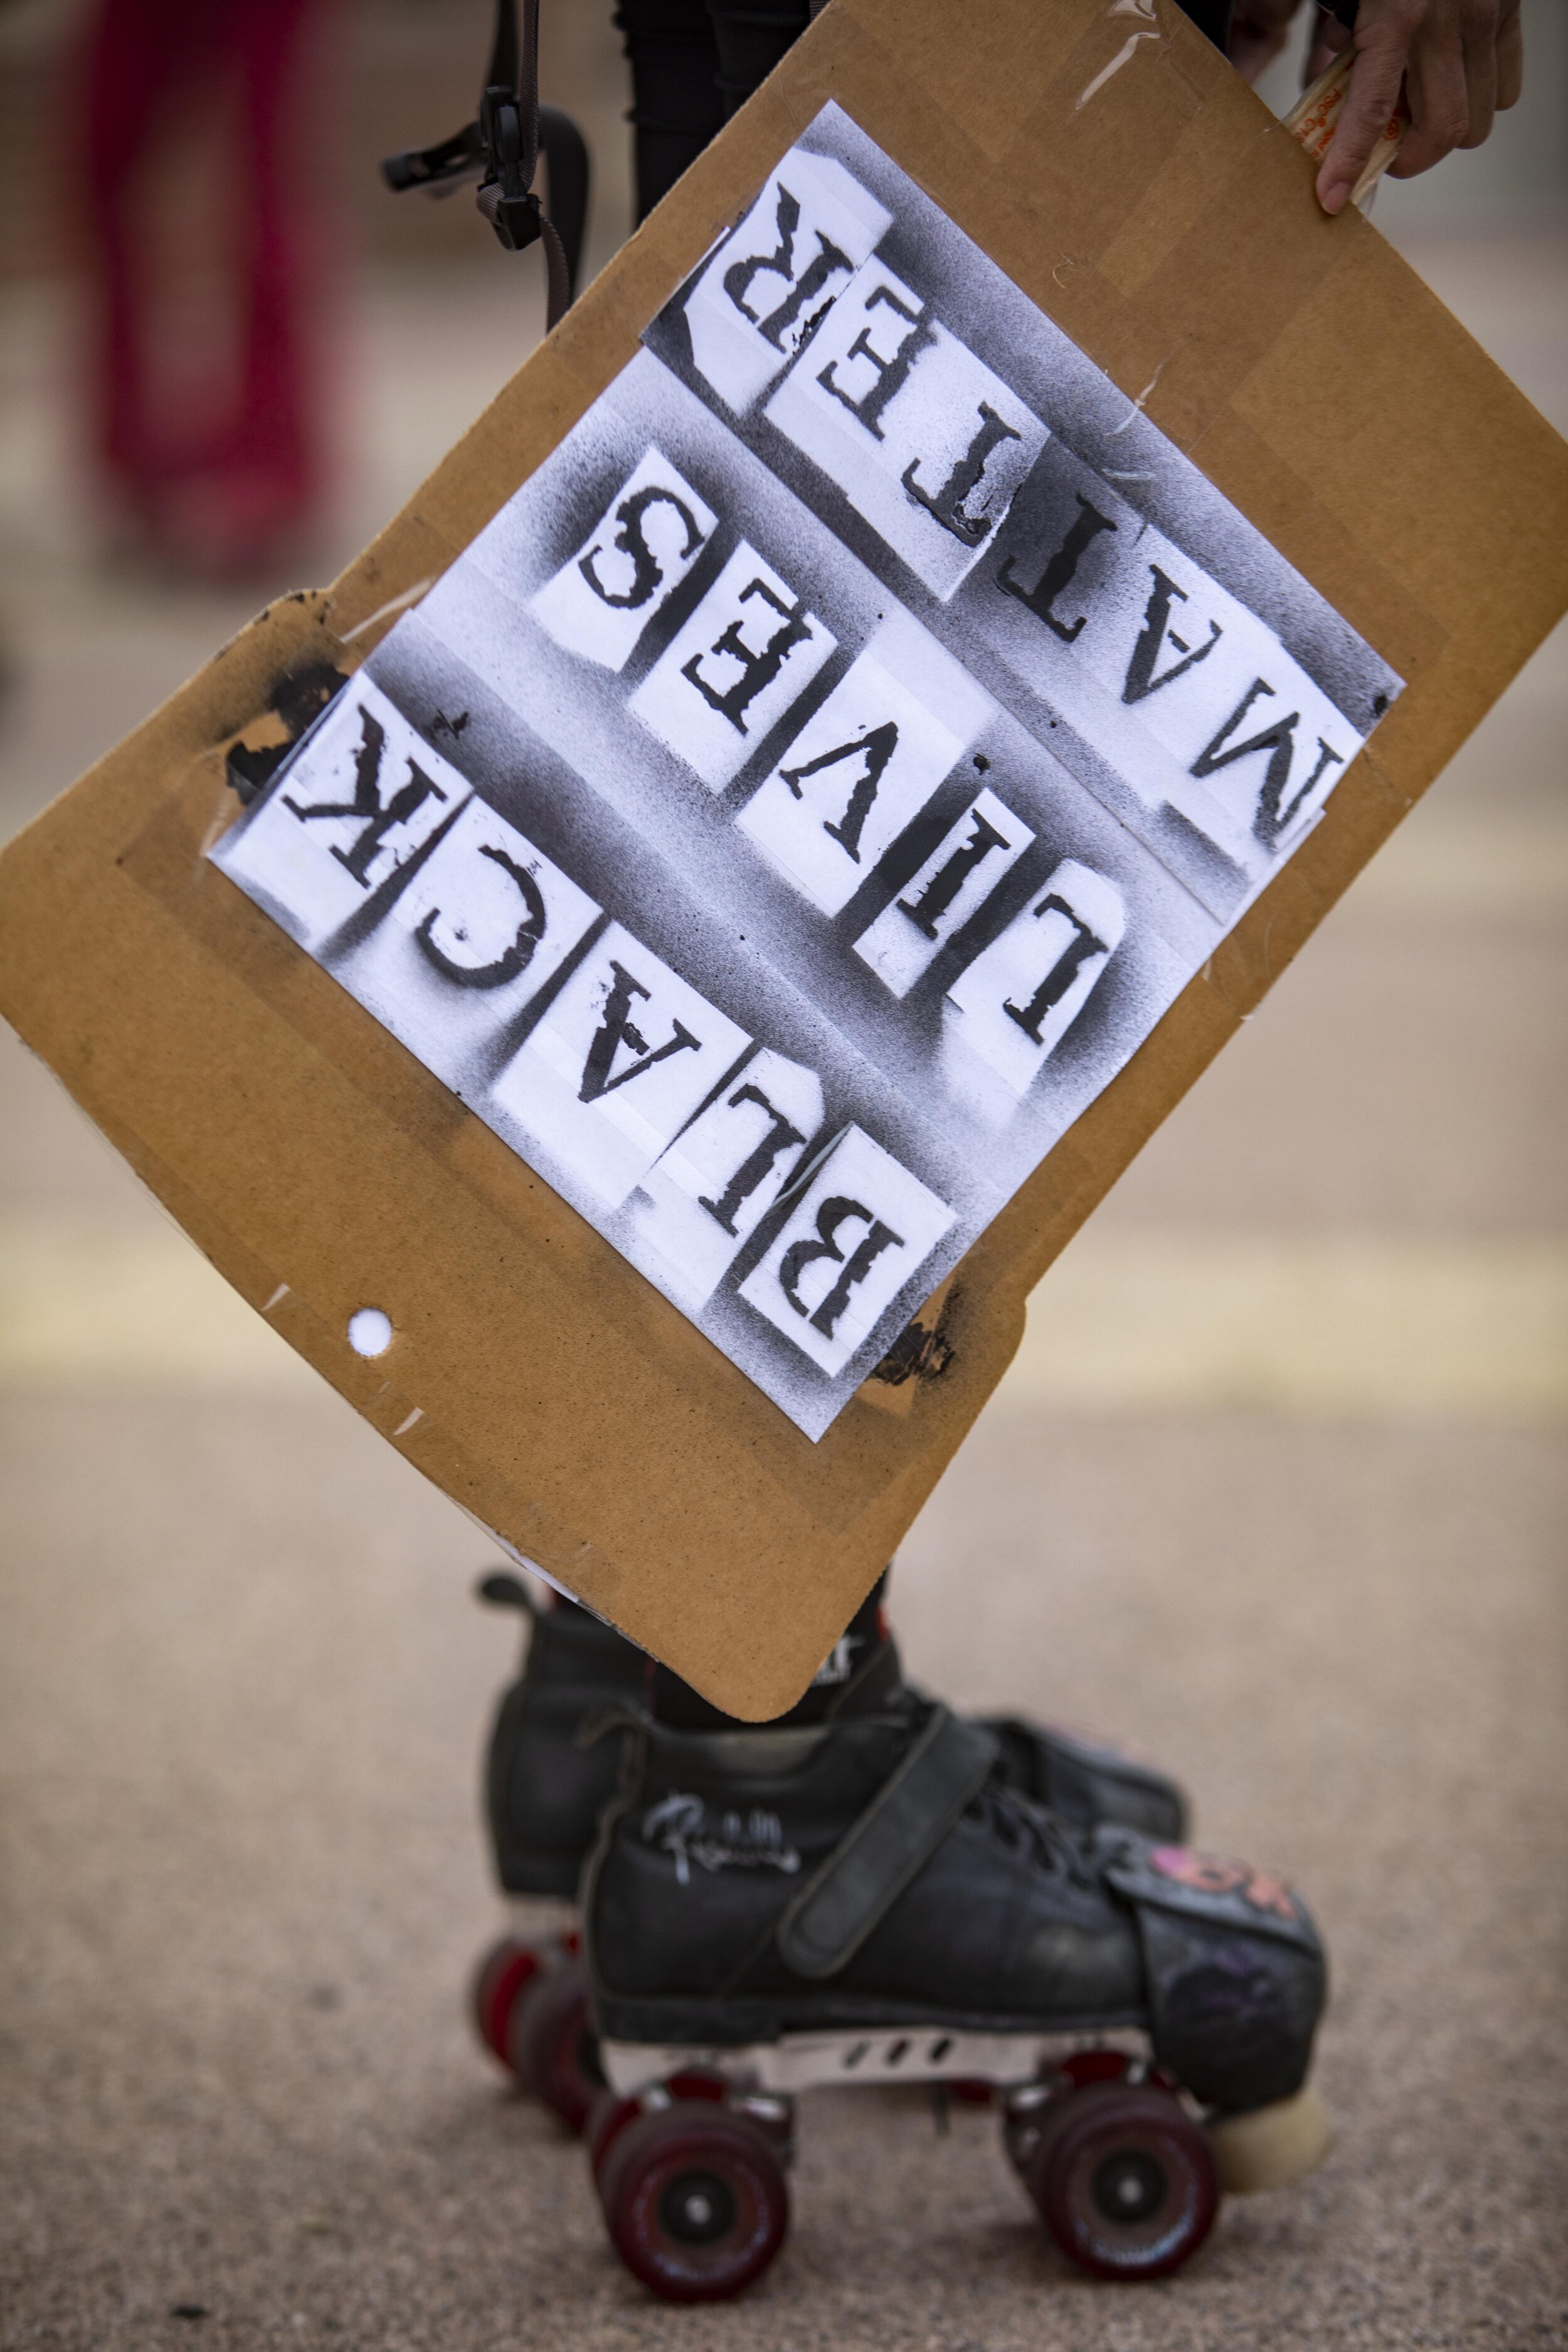  A roller skater holds a Black Lives Matter sign at the Rise &amp; Skate  all wheels welcome protest in celebration of Juneteenth and in solidarity with Black Lives Matter in Los Angeles.  